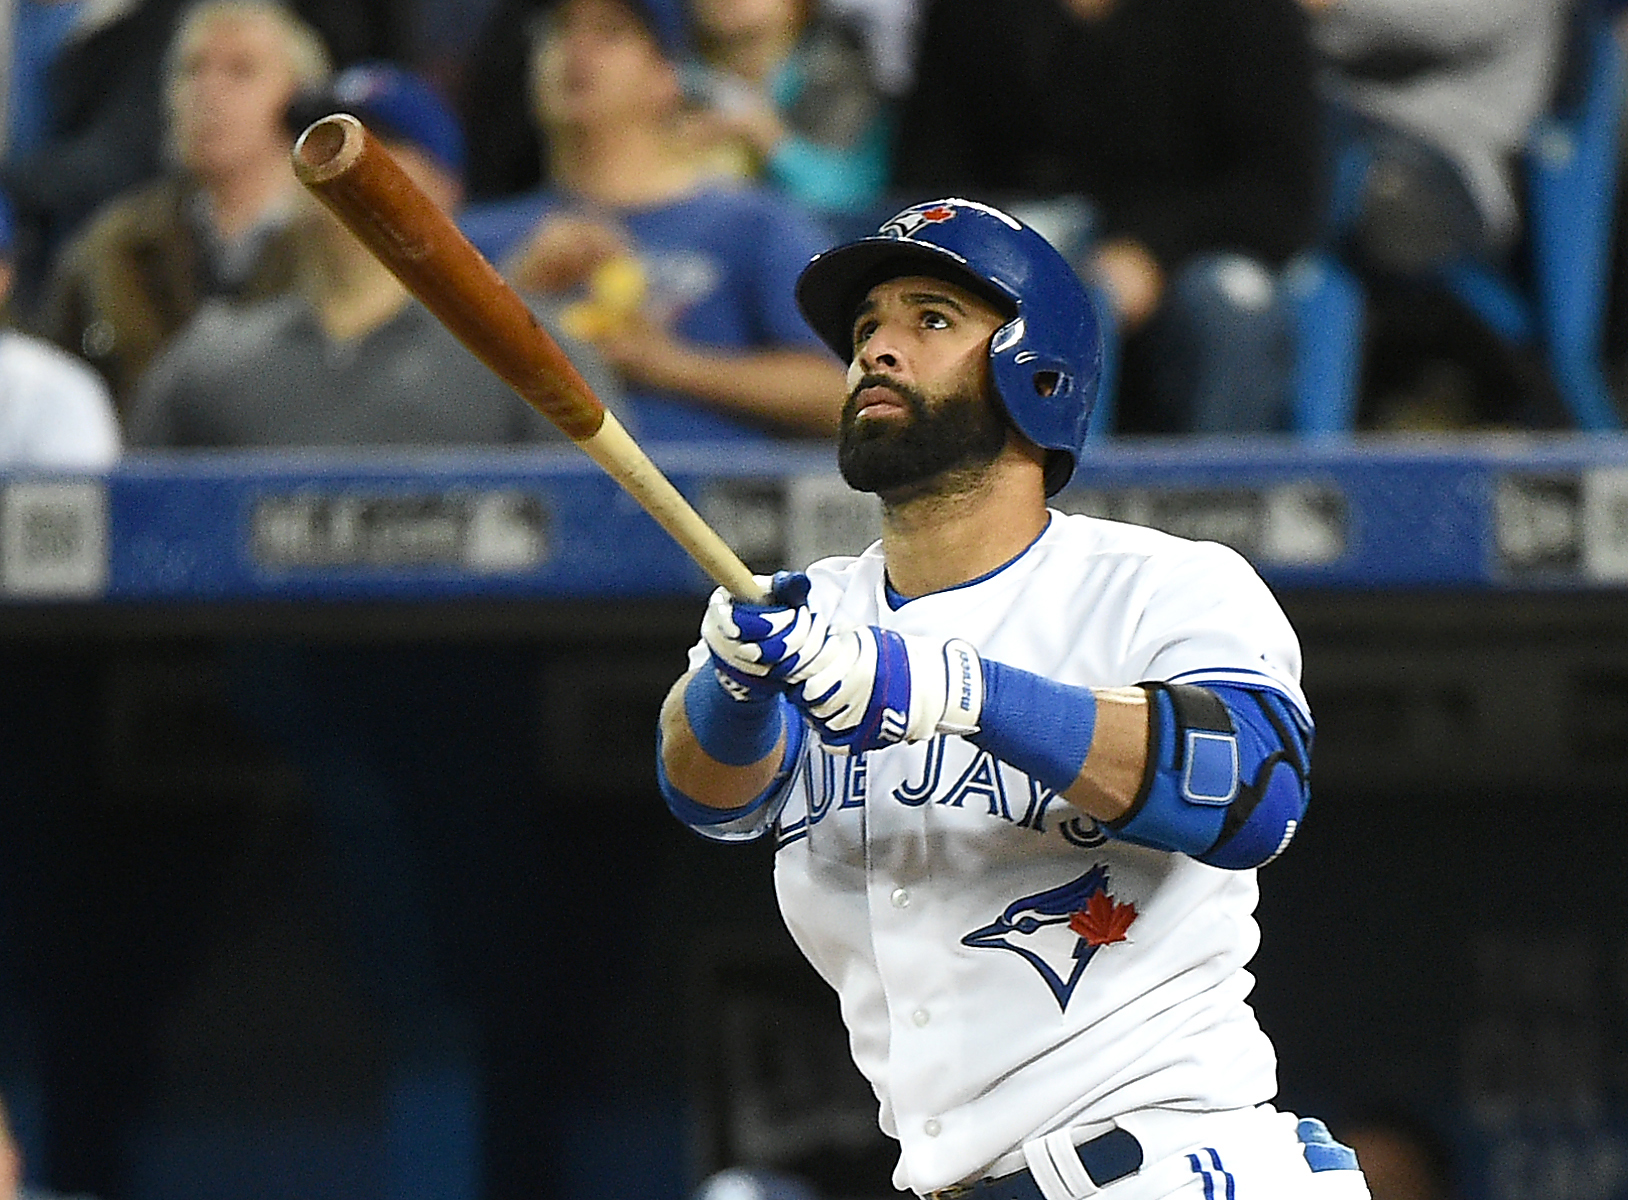 Blue Jays pound Rays' pitching in 12-7 win | wtsp.com